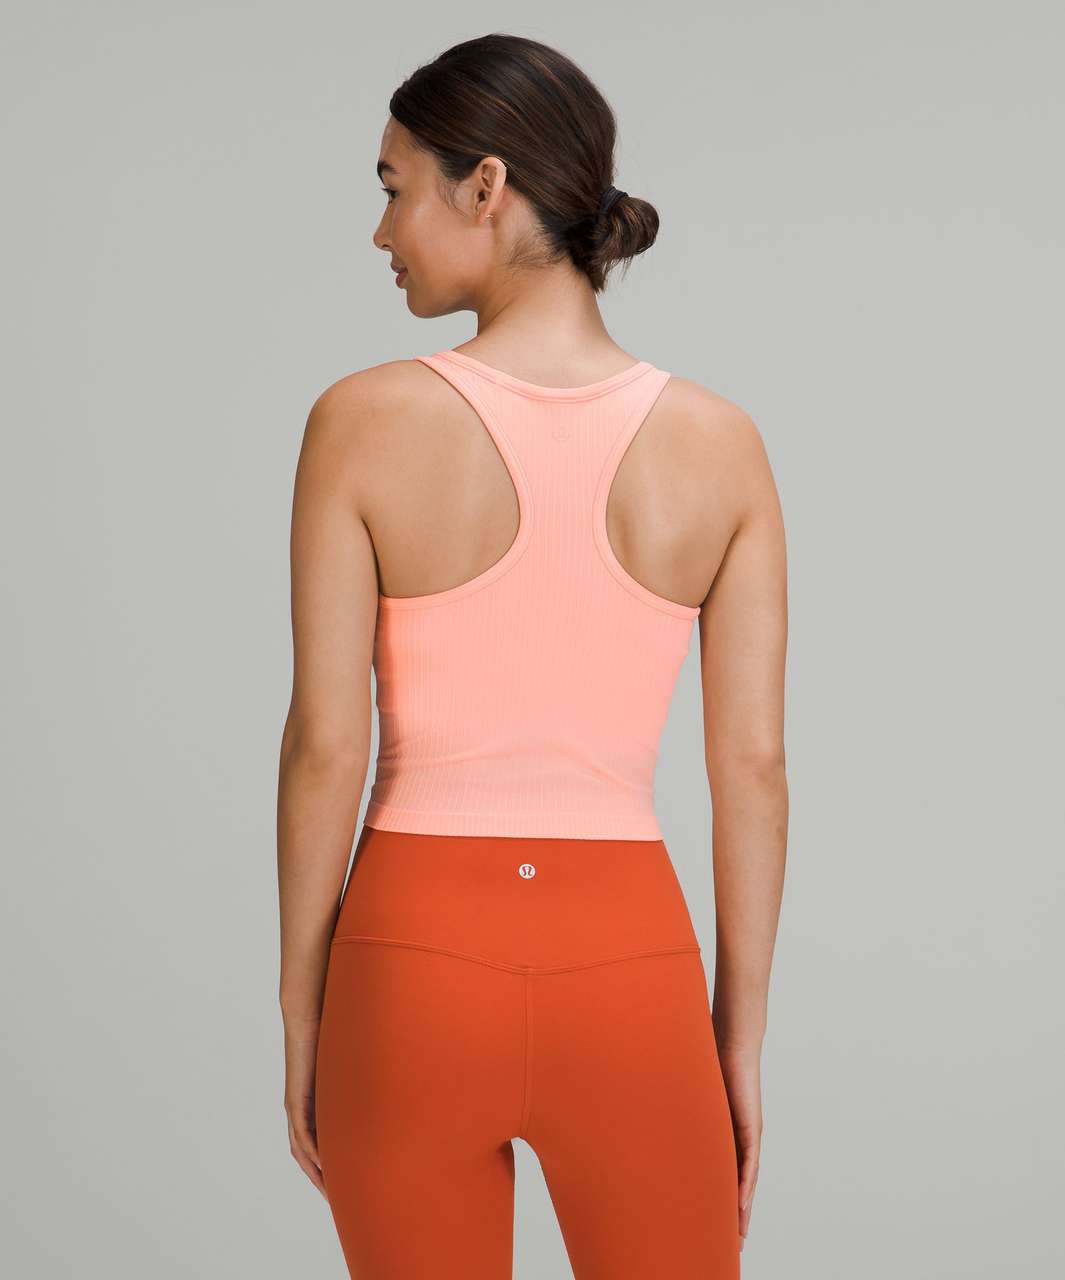 Lululemon Ebb To Street Racerback Crop Tank Size 6 - $80 New With Tags -  From Isabella